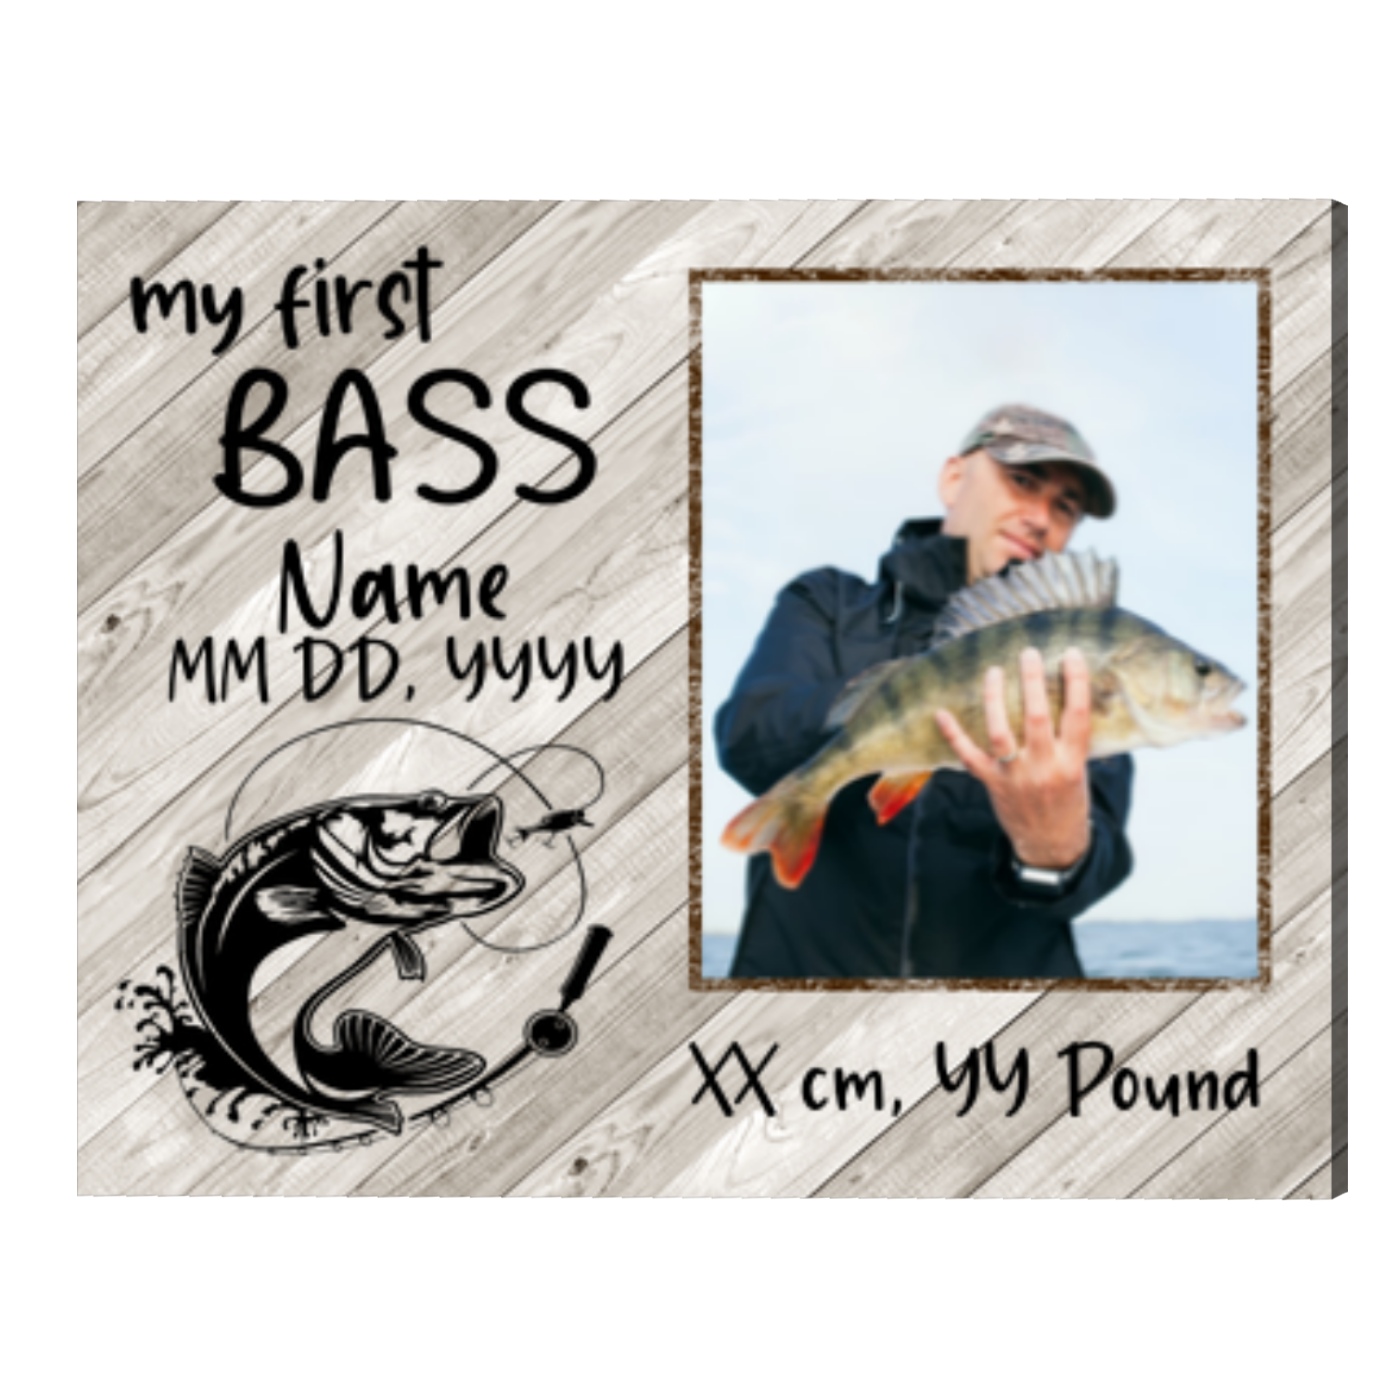 My First Bass Photo Gift Canvas, Custom Fishing Gift For Men, Father's Day  Fishing Gift For Grandpa, Best Gifts For Fisherman - Best Personalized Gifts  For Everyone